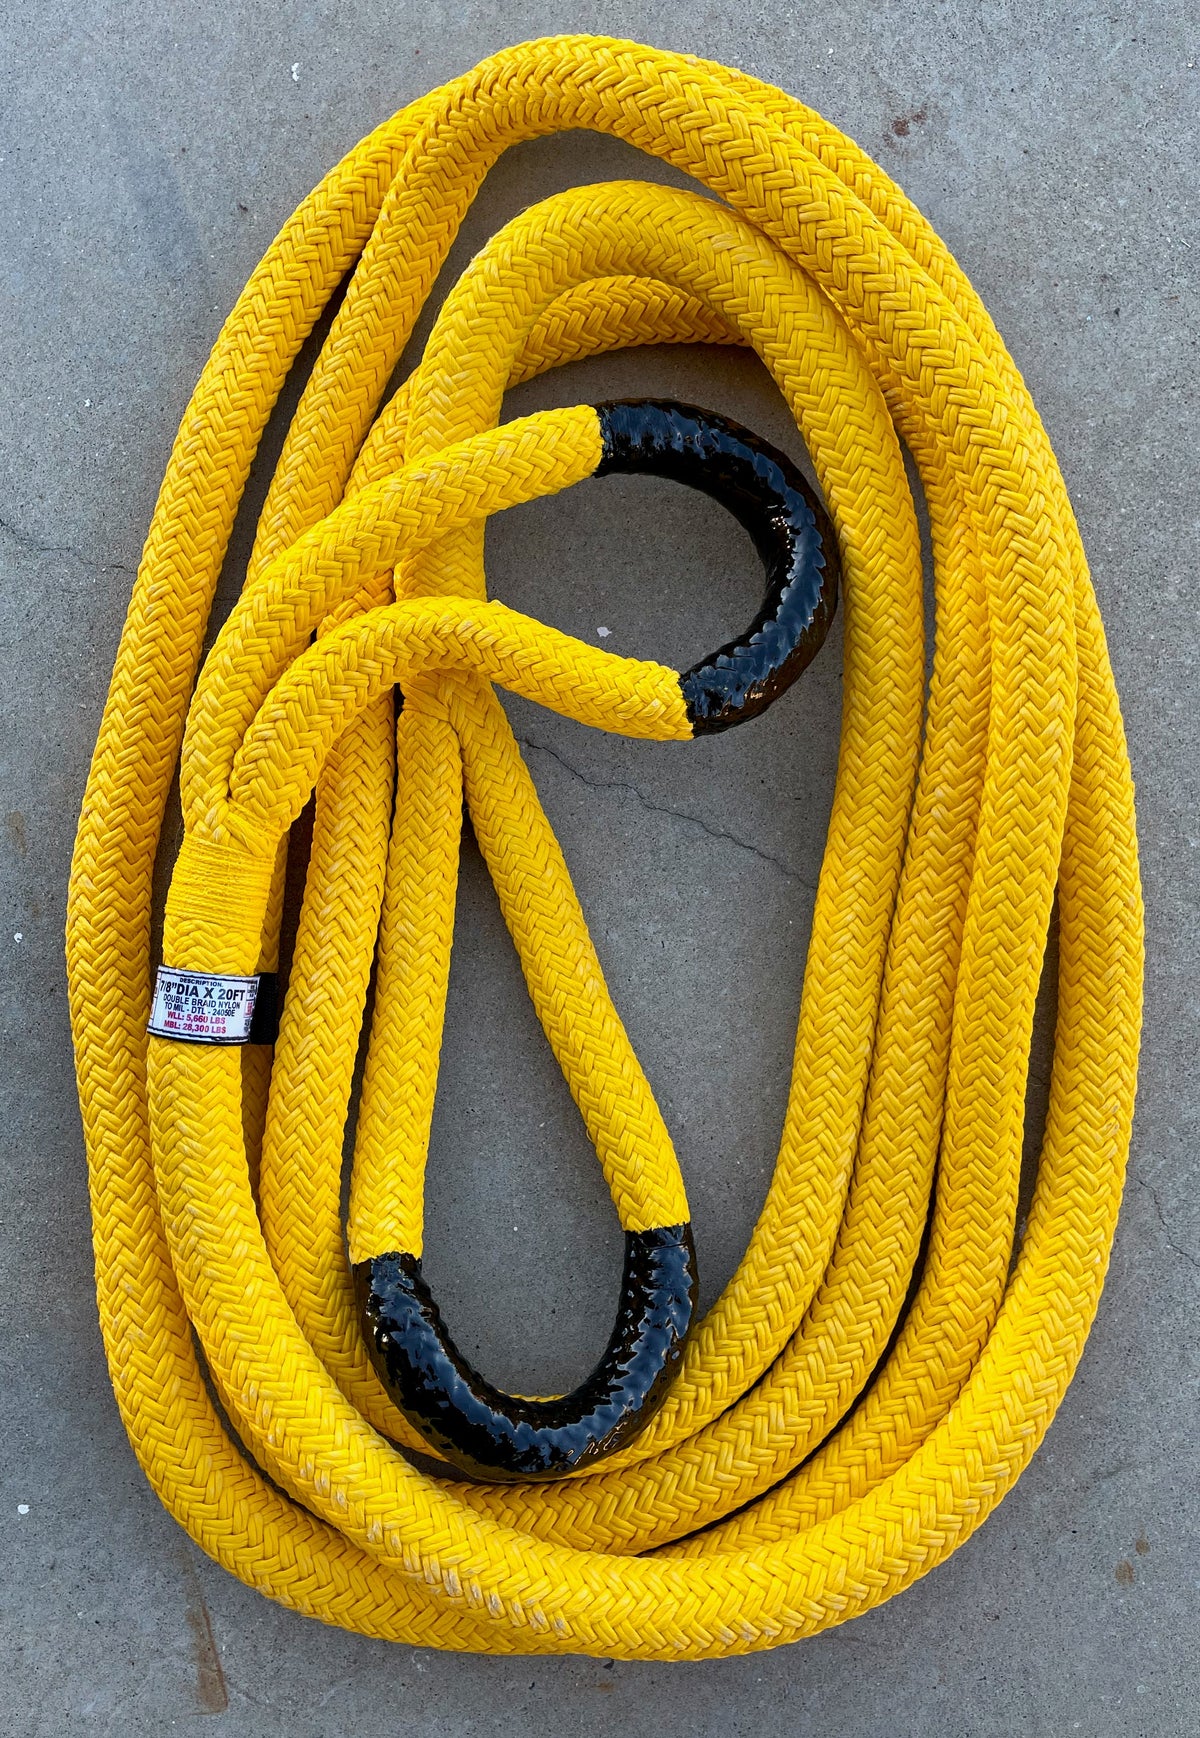 The Stretchy Band 7/8" x 30' - $229.99 Recovery Gear, Camping Gear Deadman Off-Road- Overland Kitted